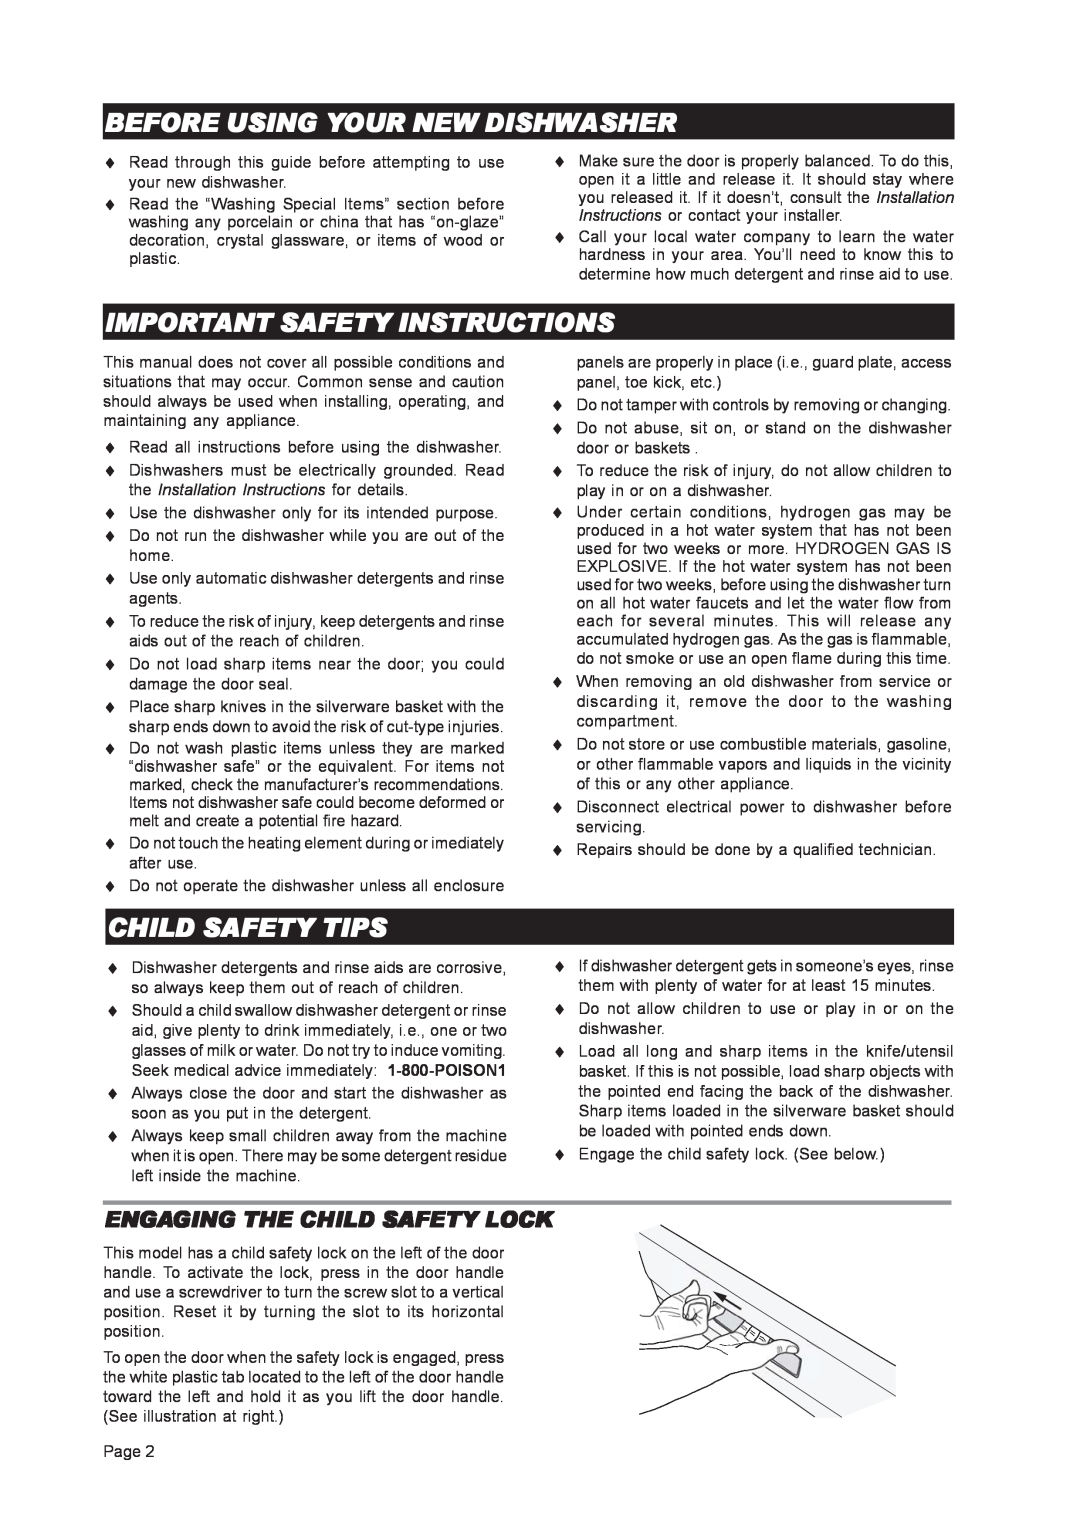 Asko D3121 important safety instructions Before Using Your New Dishwasher, Important Safety Instructions, Child Safety Tips 